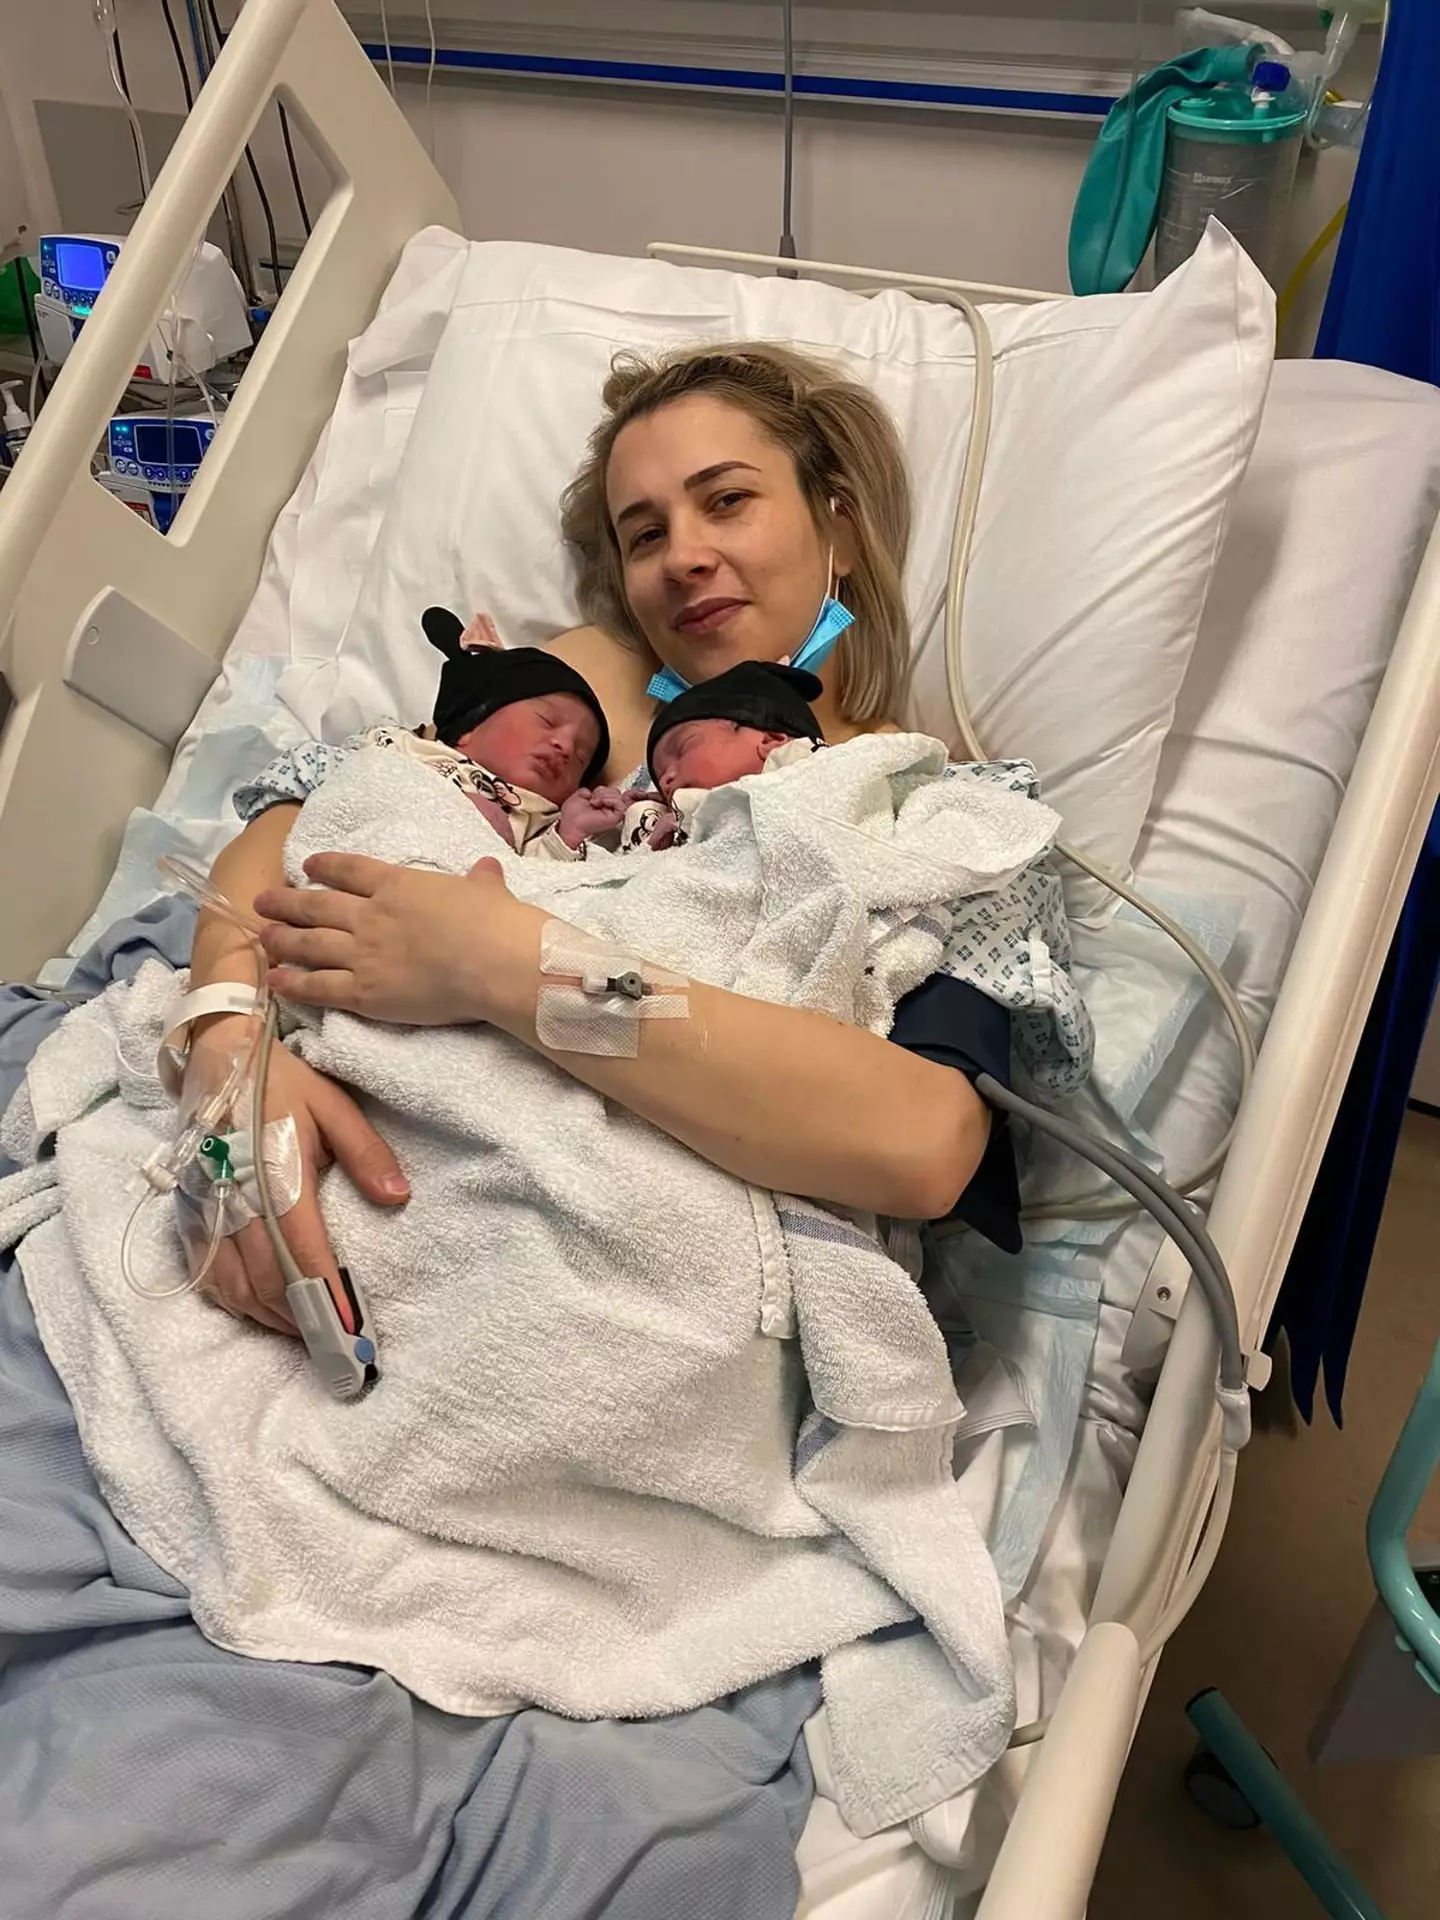 Alina gave birth to twin girls in March this year.